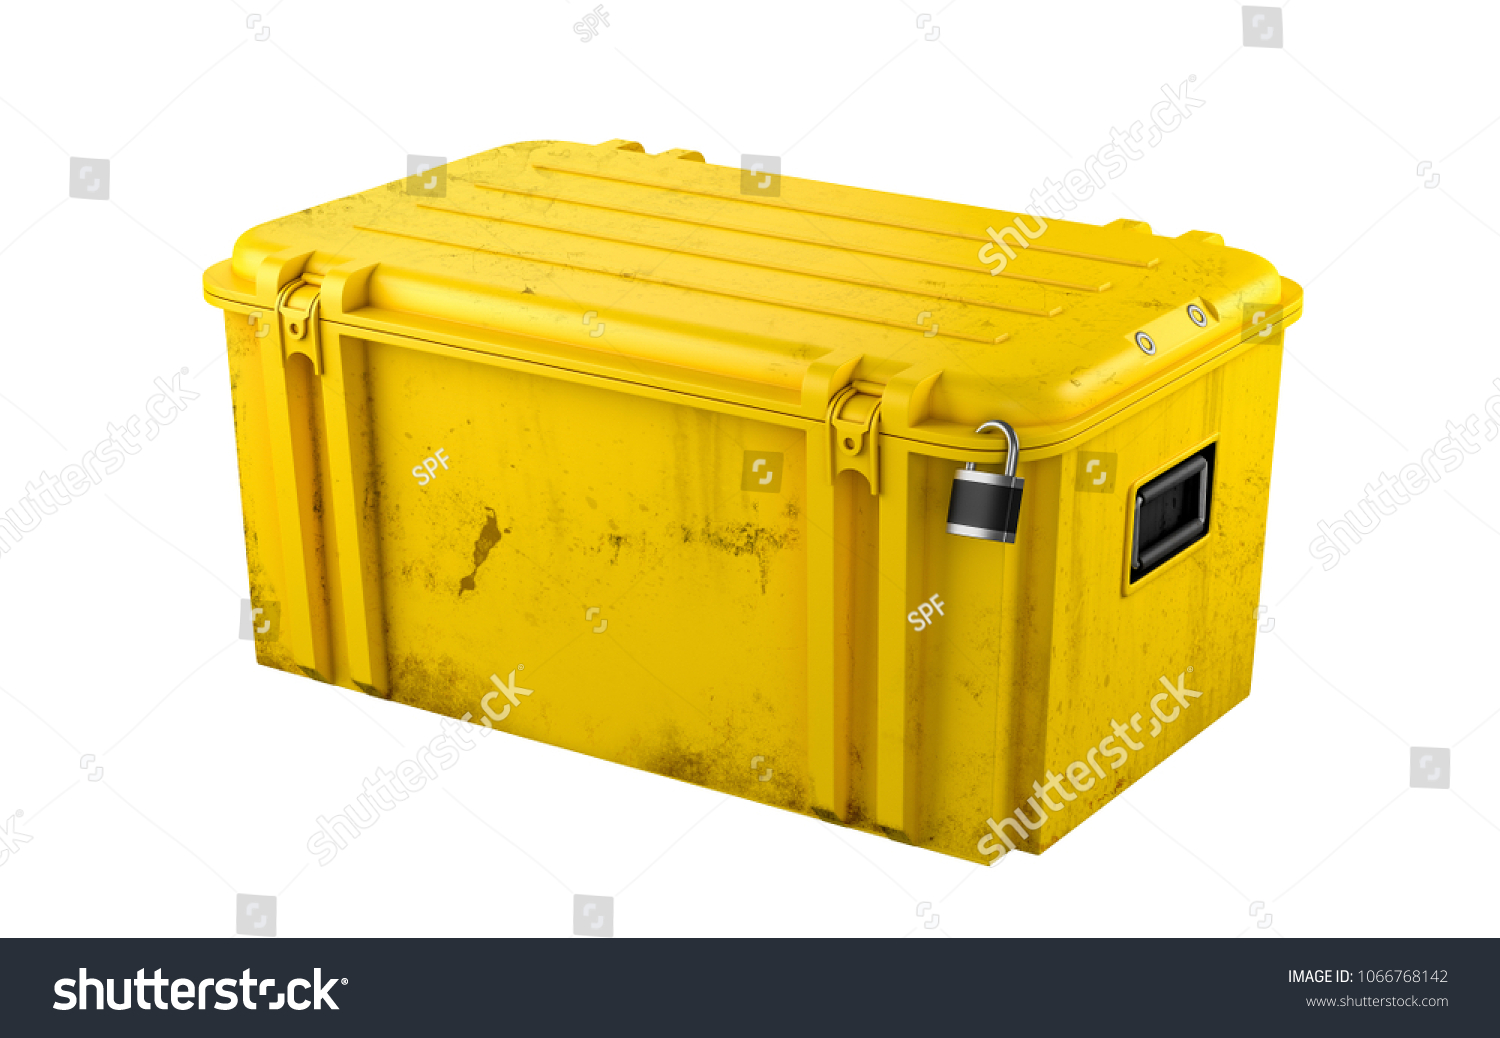 Download 3d Render Yellow Plastic Case On Stock Illustration 1066768142 PSD Mockup Templates